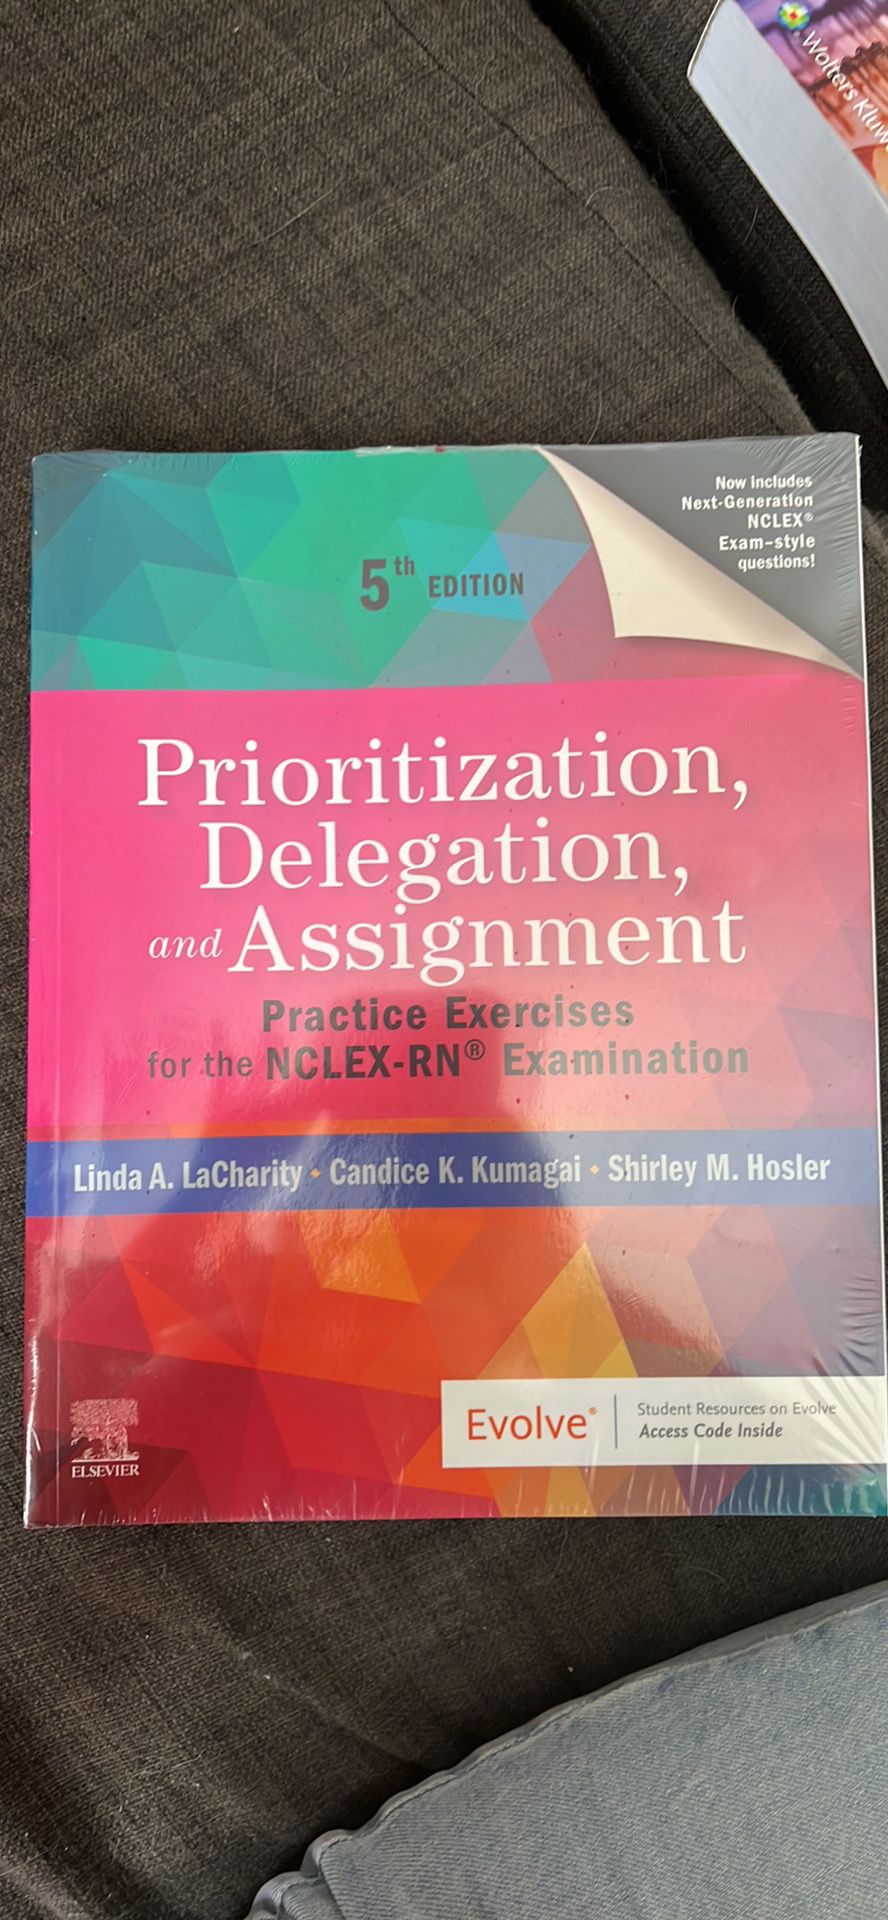 Prioritization, delegation, and Assignment 